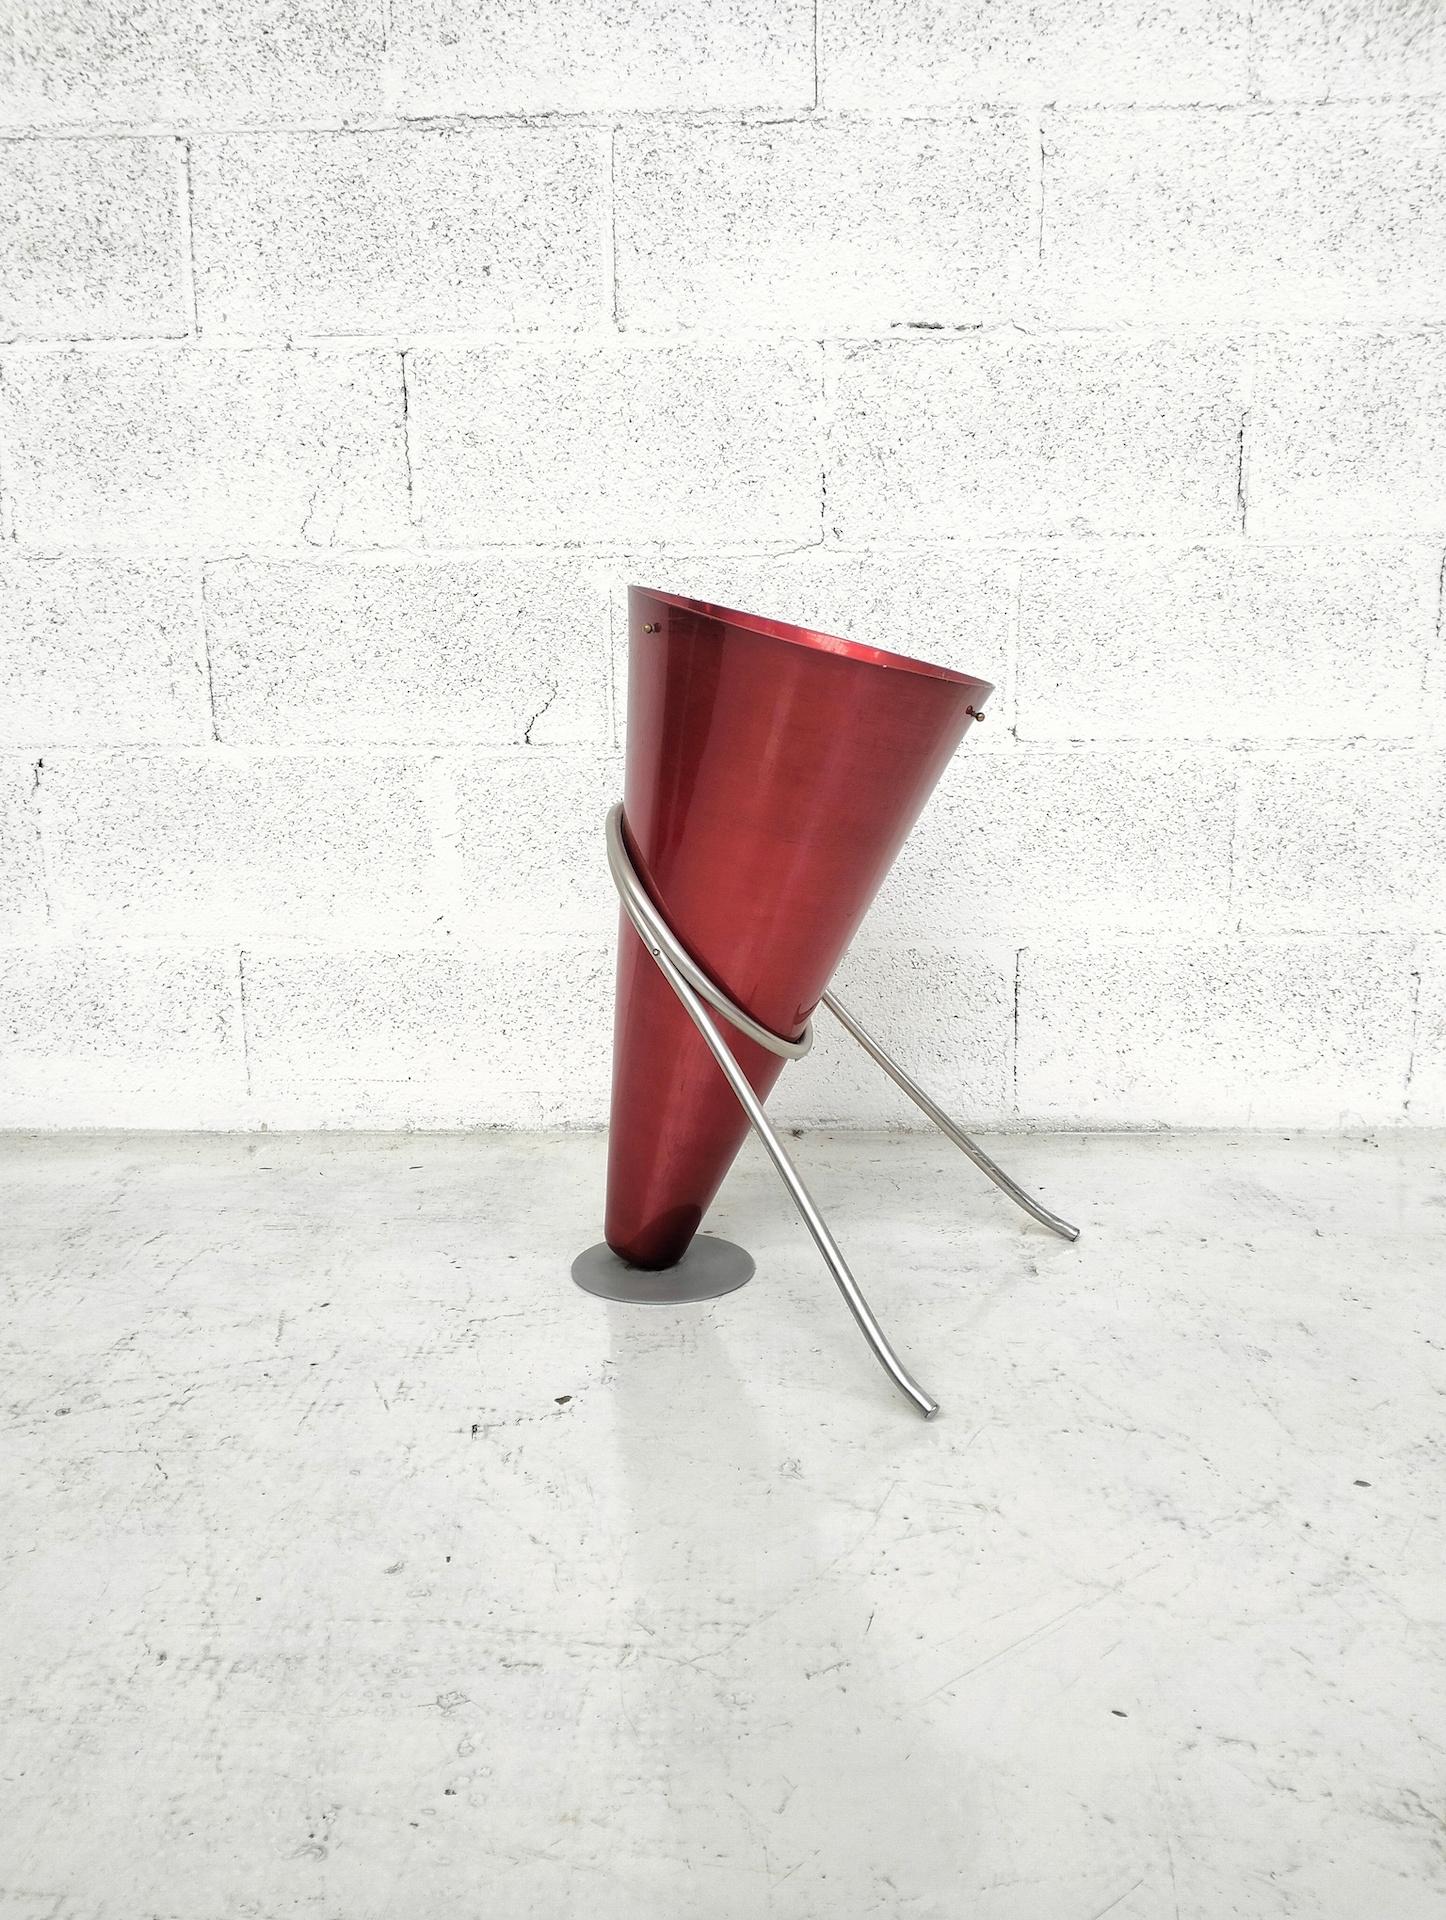 Umbrella stand designed by Ettore Sottsass and produced by the Rinnovel Metallurgical Industry in the 70s. Rare and famous object, passed through many important auctions in the sector. Made entirely of painted aluminum.

ETTORE SOTTSASS
(Innsbruck,